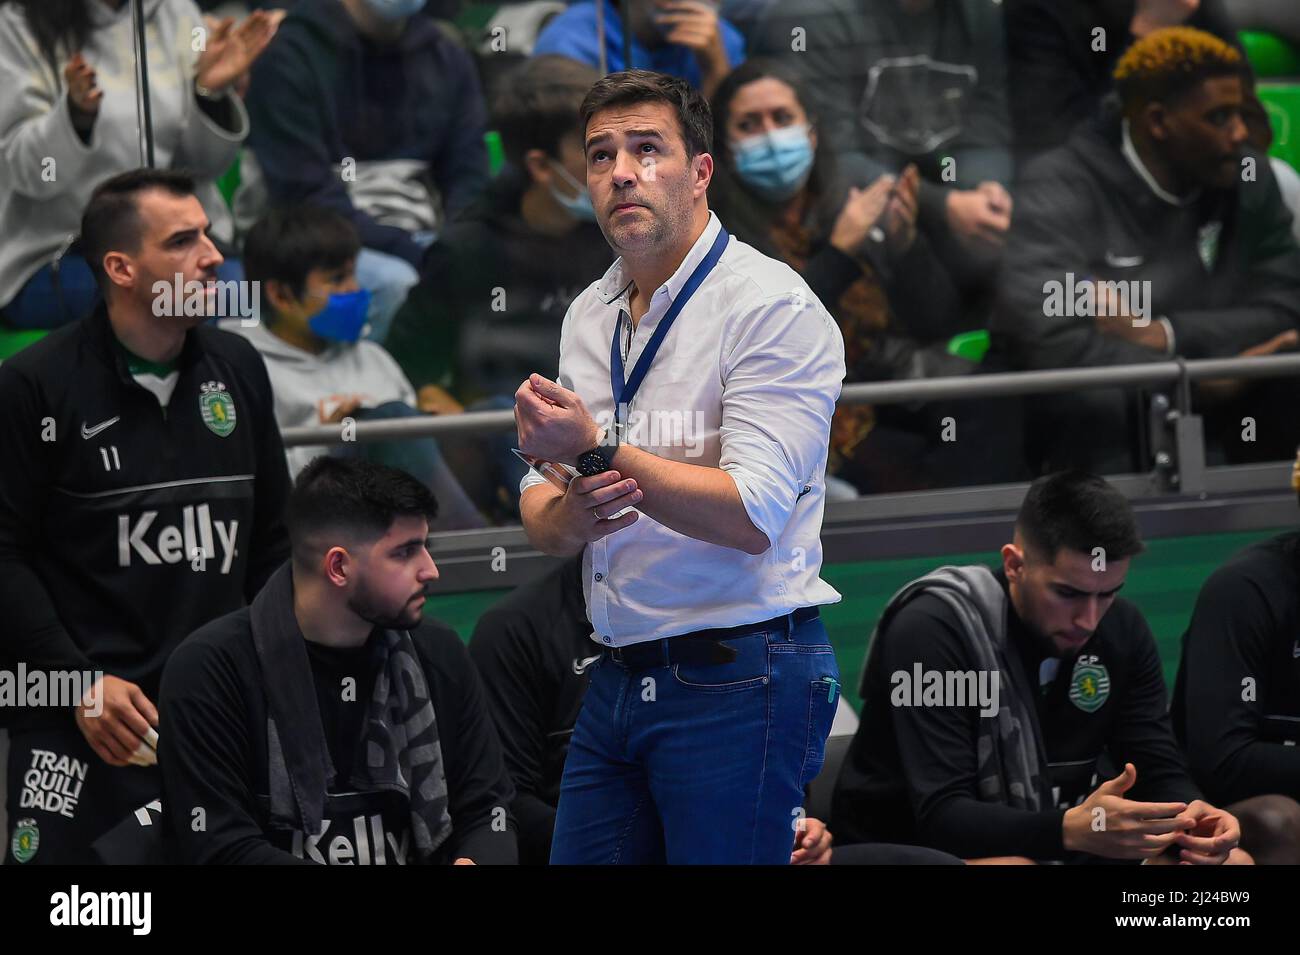 Lisbon, Portugal. 29th Mar, 2022. Ricardo Costa, Sporting CP Coach seen in action during the Last 16 EHF European League Handball match between Sporting CP and SC Magdeburg at Pavilhão João Rocha.Final score; Sporting CP 29:29 SC Magdeburg. (Photo by Bruno de Carvalho/SOPA Images/Sipa USA) Credit: Sipa USA/Alamy Live News Stock Photo